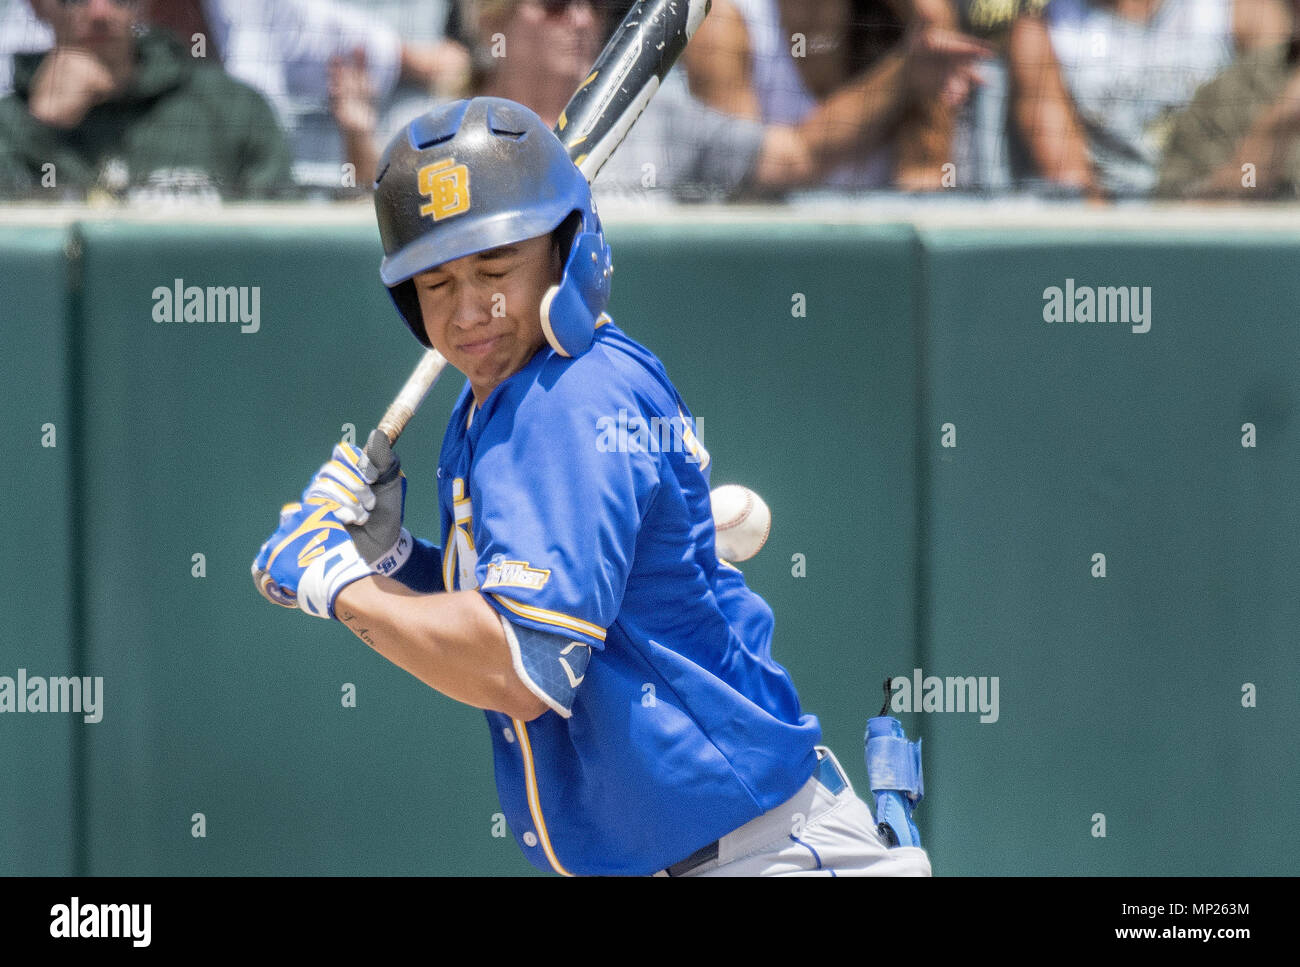 San Luis Obispo, California, USA. 20th May, 2018. UCSB second basemen ANDREW MARTINEZ gets hit by a pitch in the first inning by Cal Poly's right handed pitcher MICHAEL CLARK. Cal Poly would go on to win the game 9-3. Credit: Erick Madrid/ZUMA Wire/Alamy Live News Stock Photo